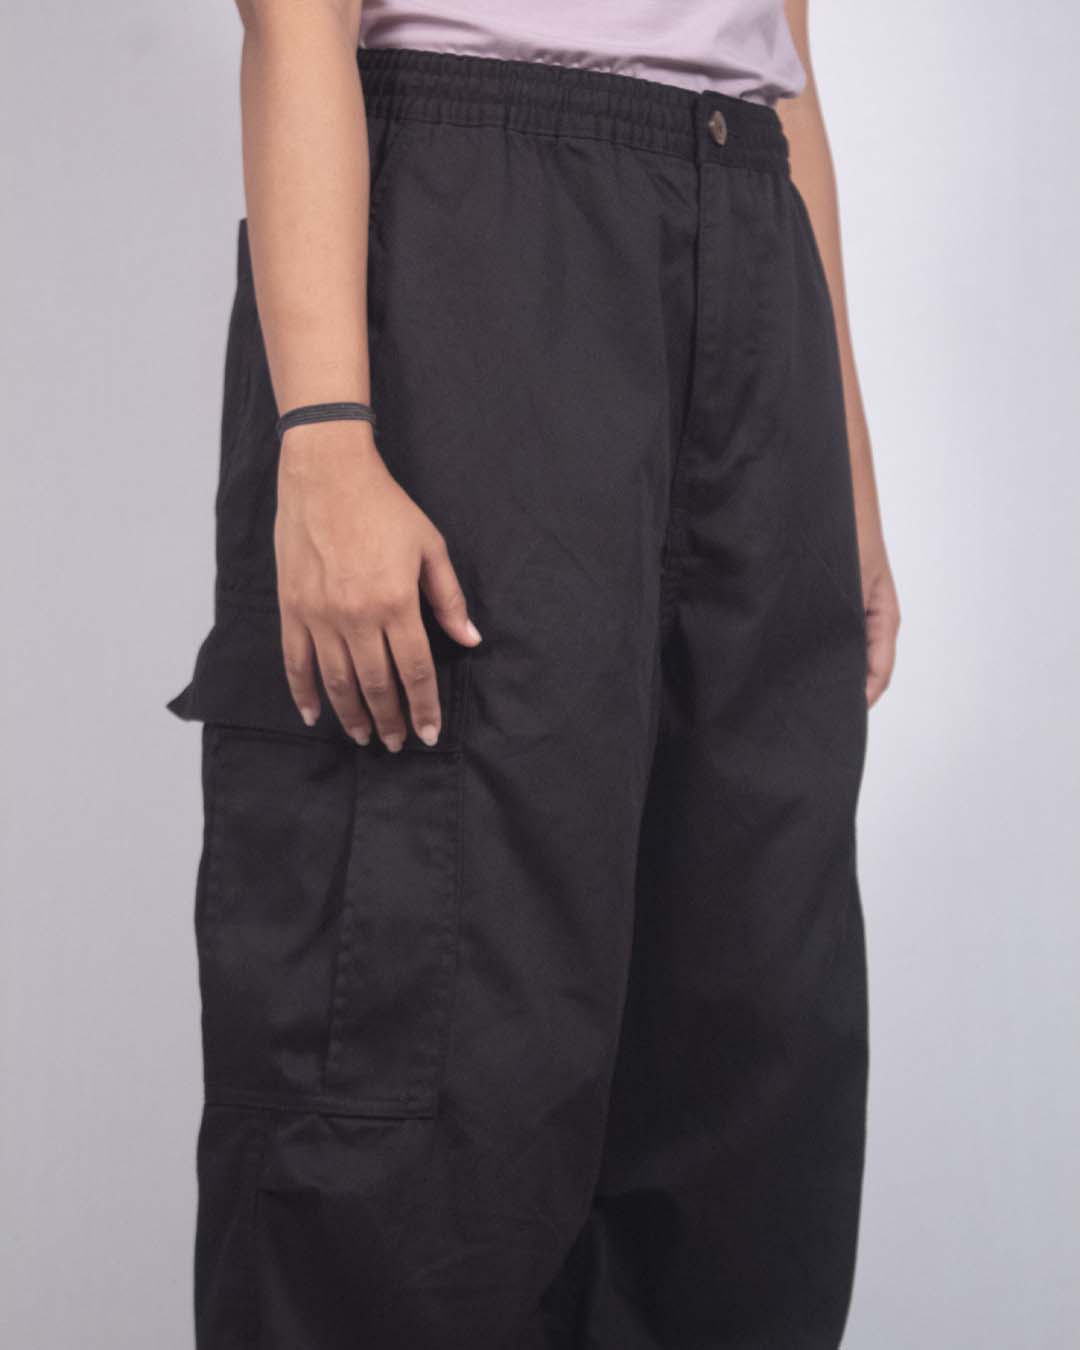 Shop Stylish Baggy Pants for Men Online - Wide Leg and Loose Fit